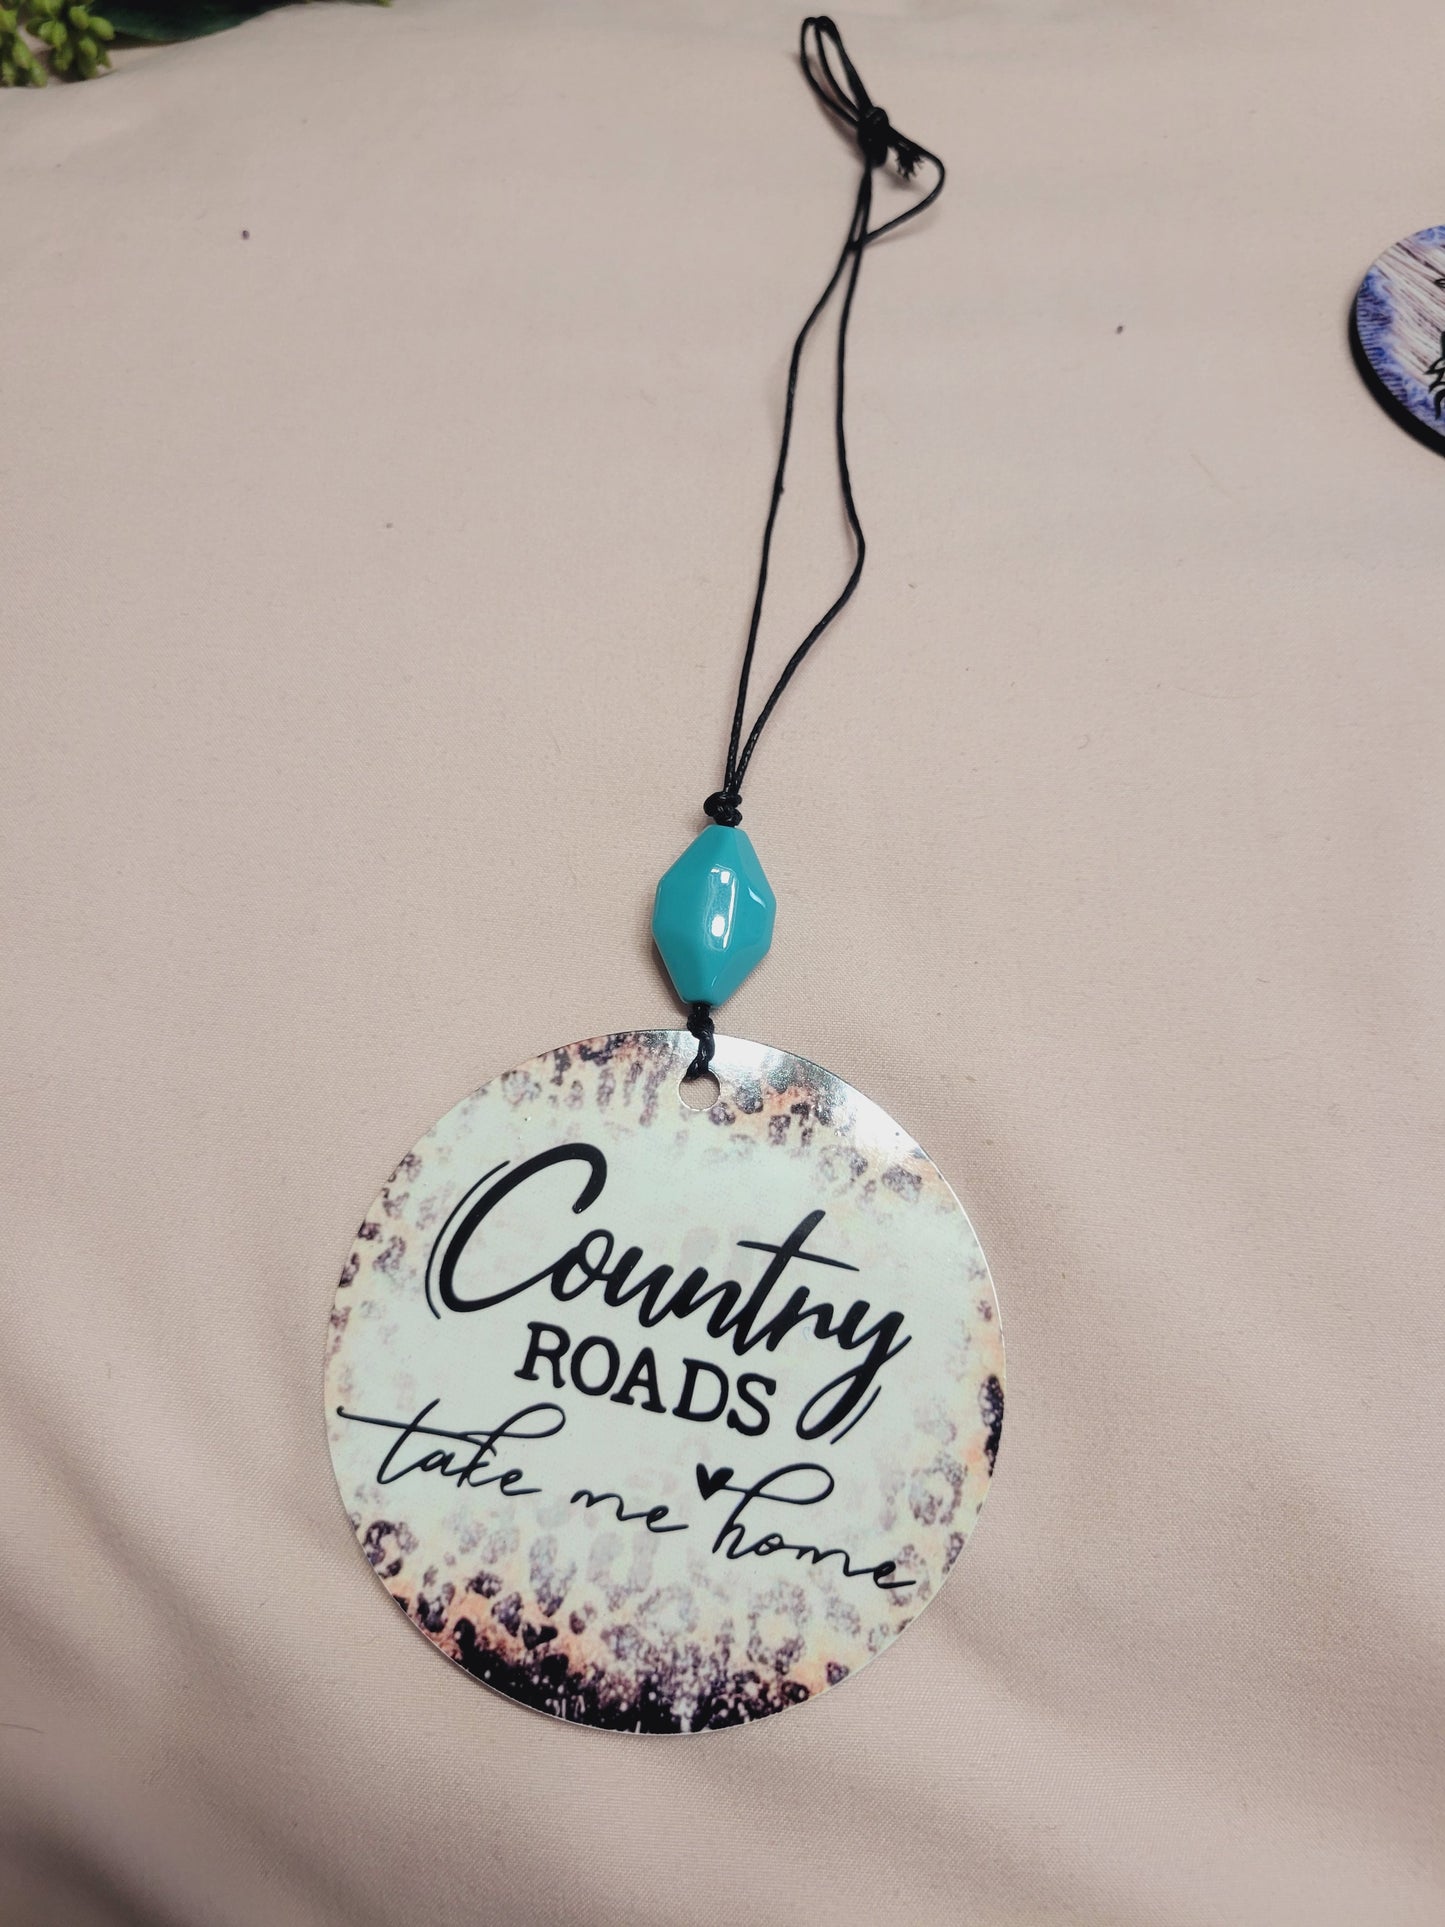 Country Road Take Me Home Cheetah, bleached cow skull rear view mirror charm, car accessory